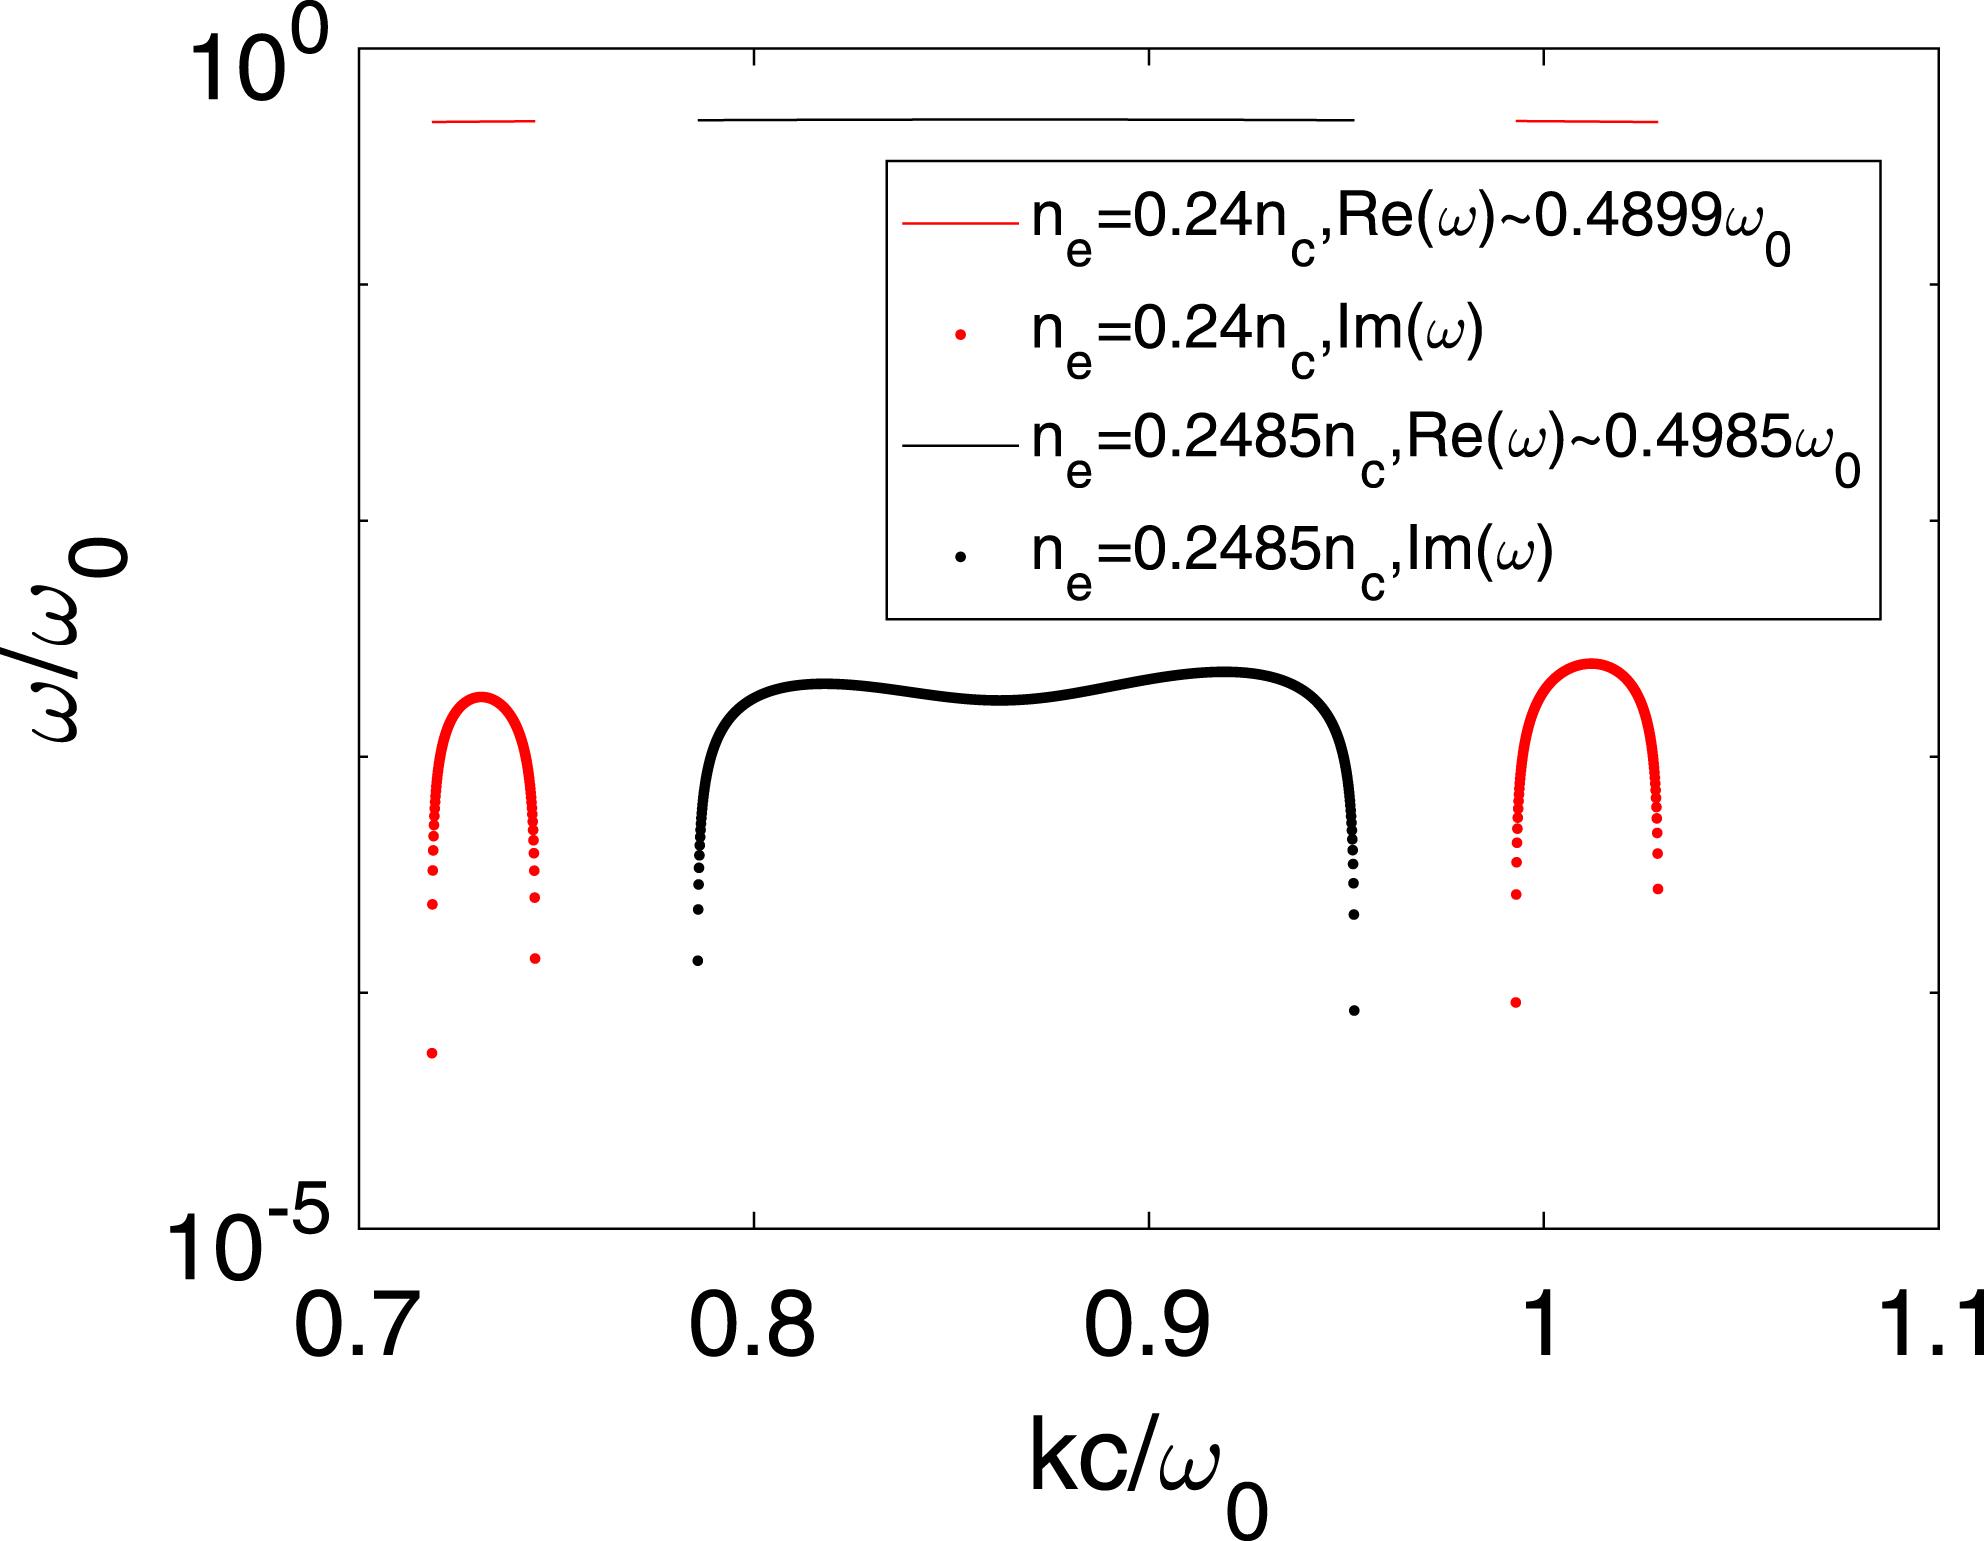 Numerical solutions of SRS dispersion equation at the plasma density $n_{e}=0.24n_{c}$ and $n_{e}=0.2485n_{c}$, where $a_{0}=0.01$. The dotted line and continuous line are the imaginary part and the real part of the solutions, respectively.